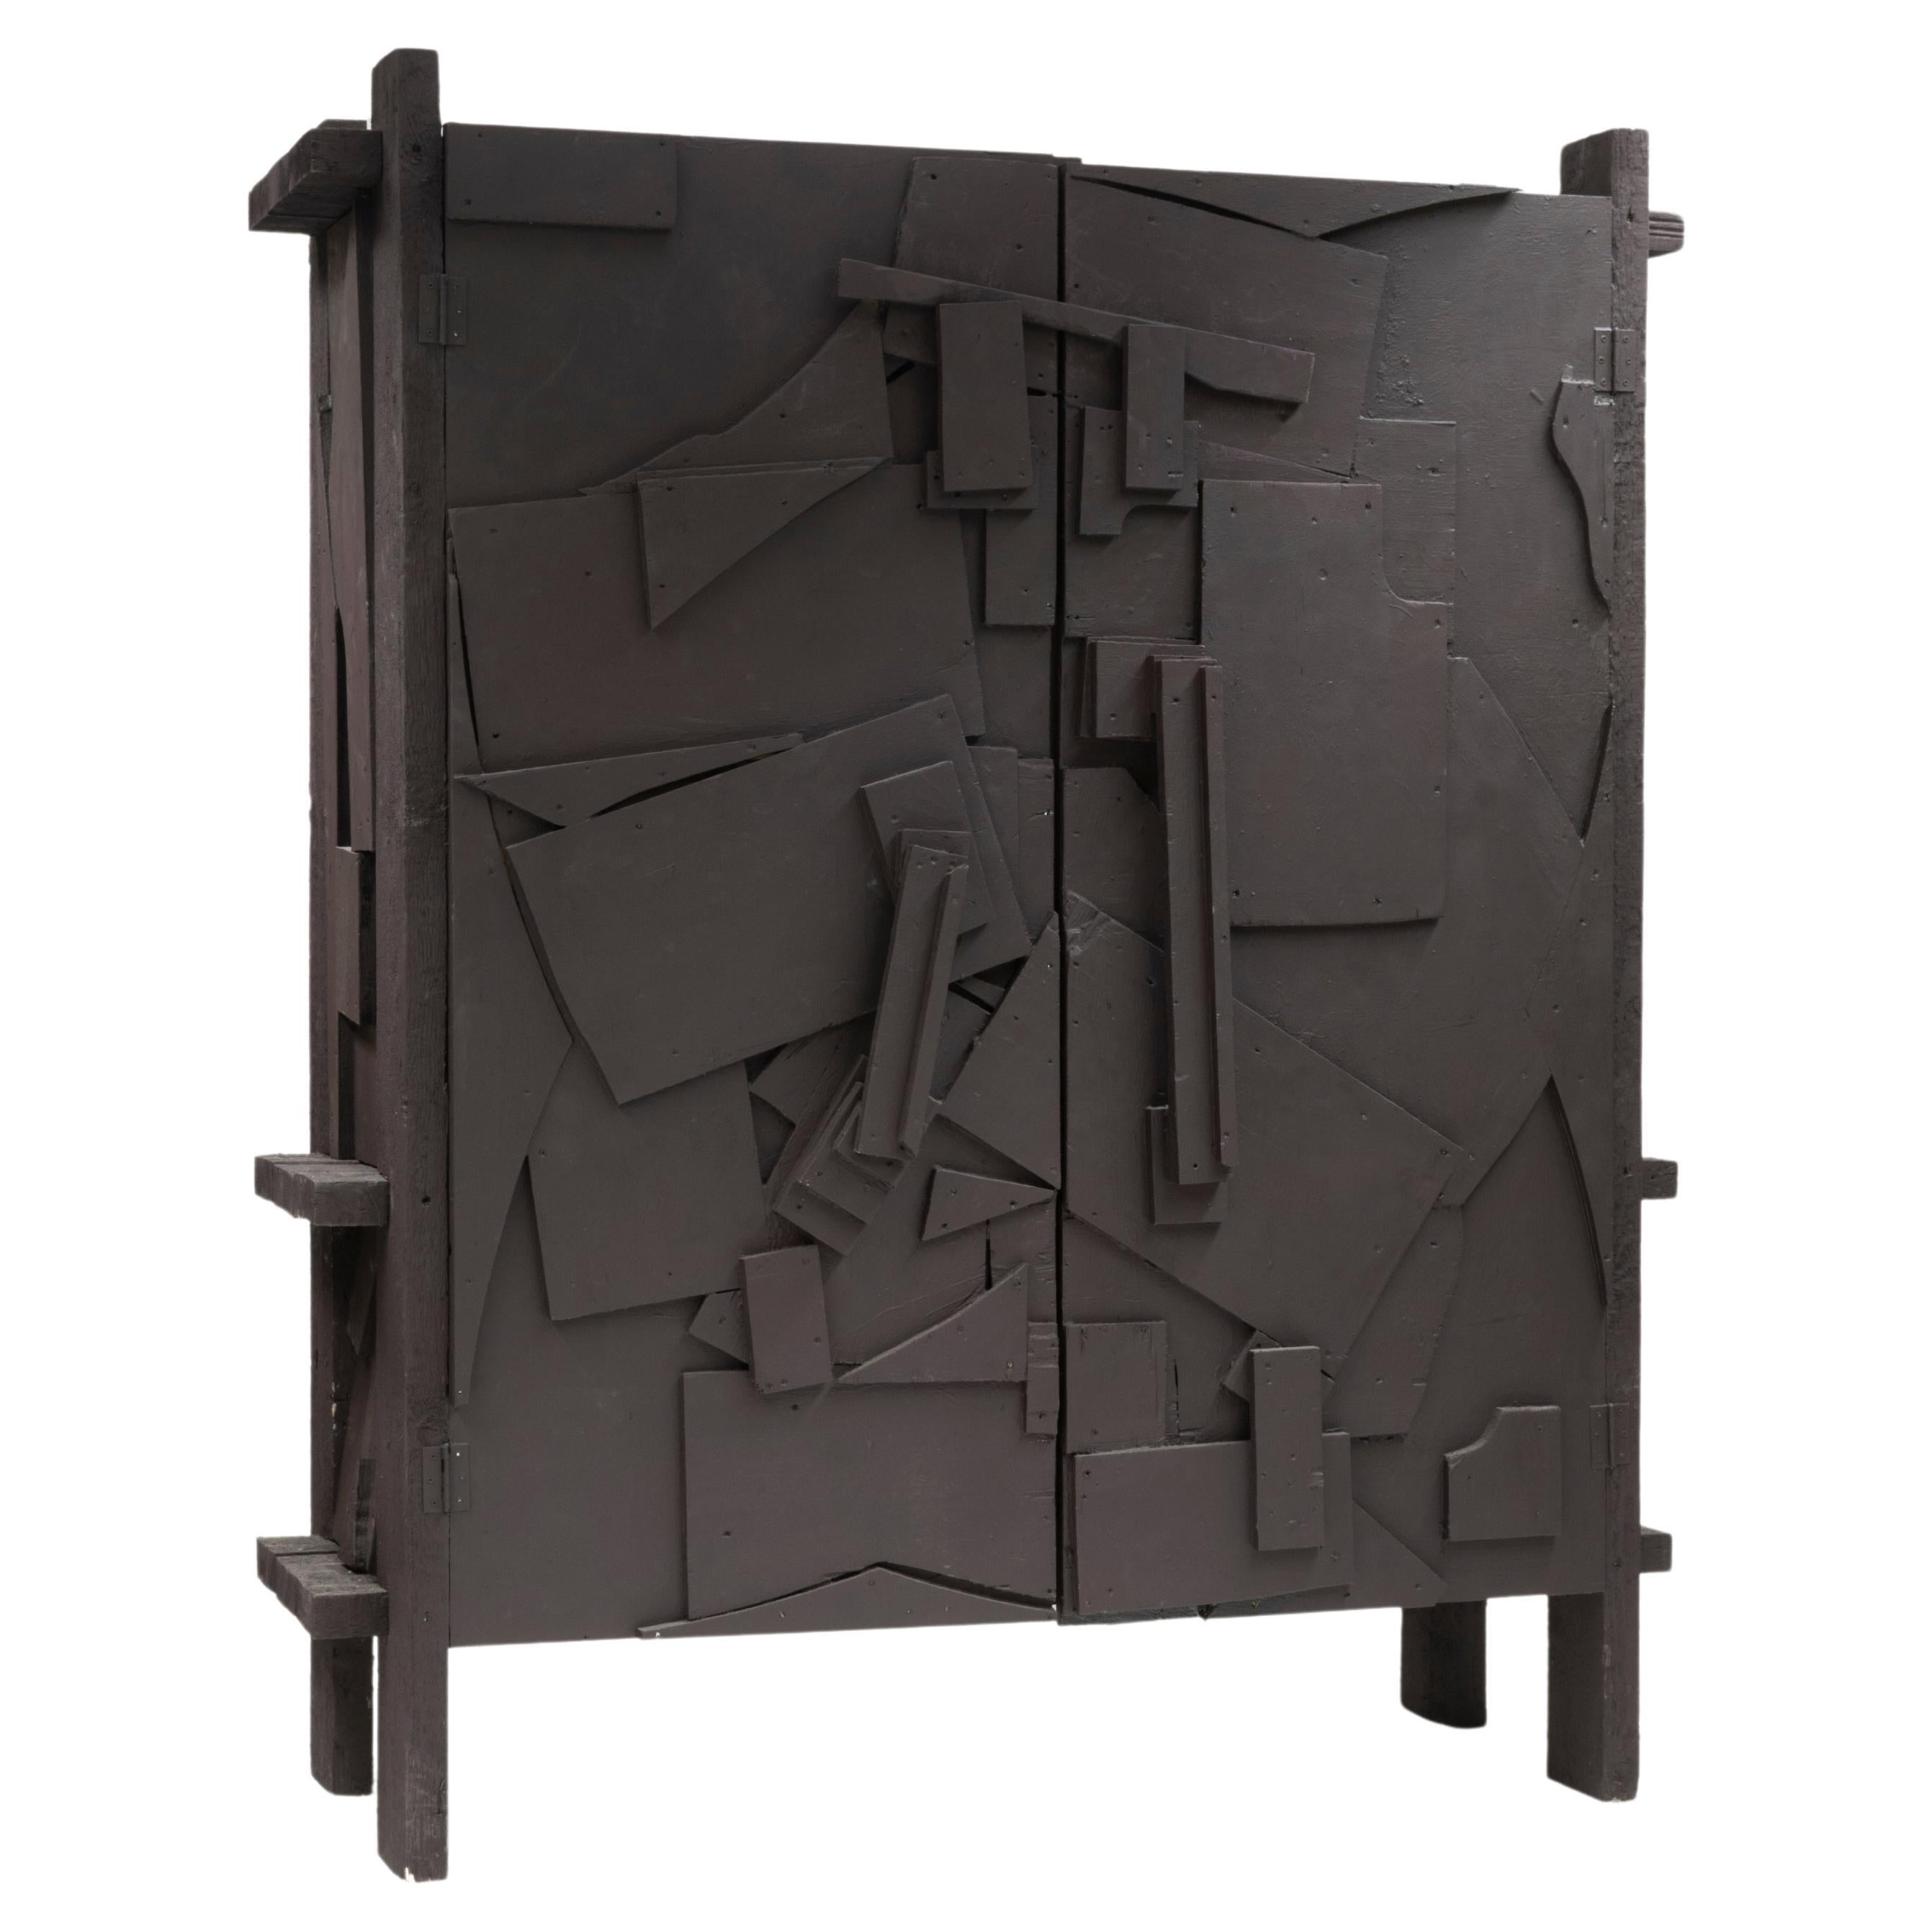 Unique Contemporary Sustainable Design Wooden Sculptural Cabinet by Teun Zwets